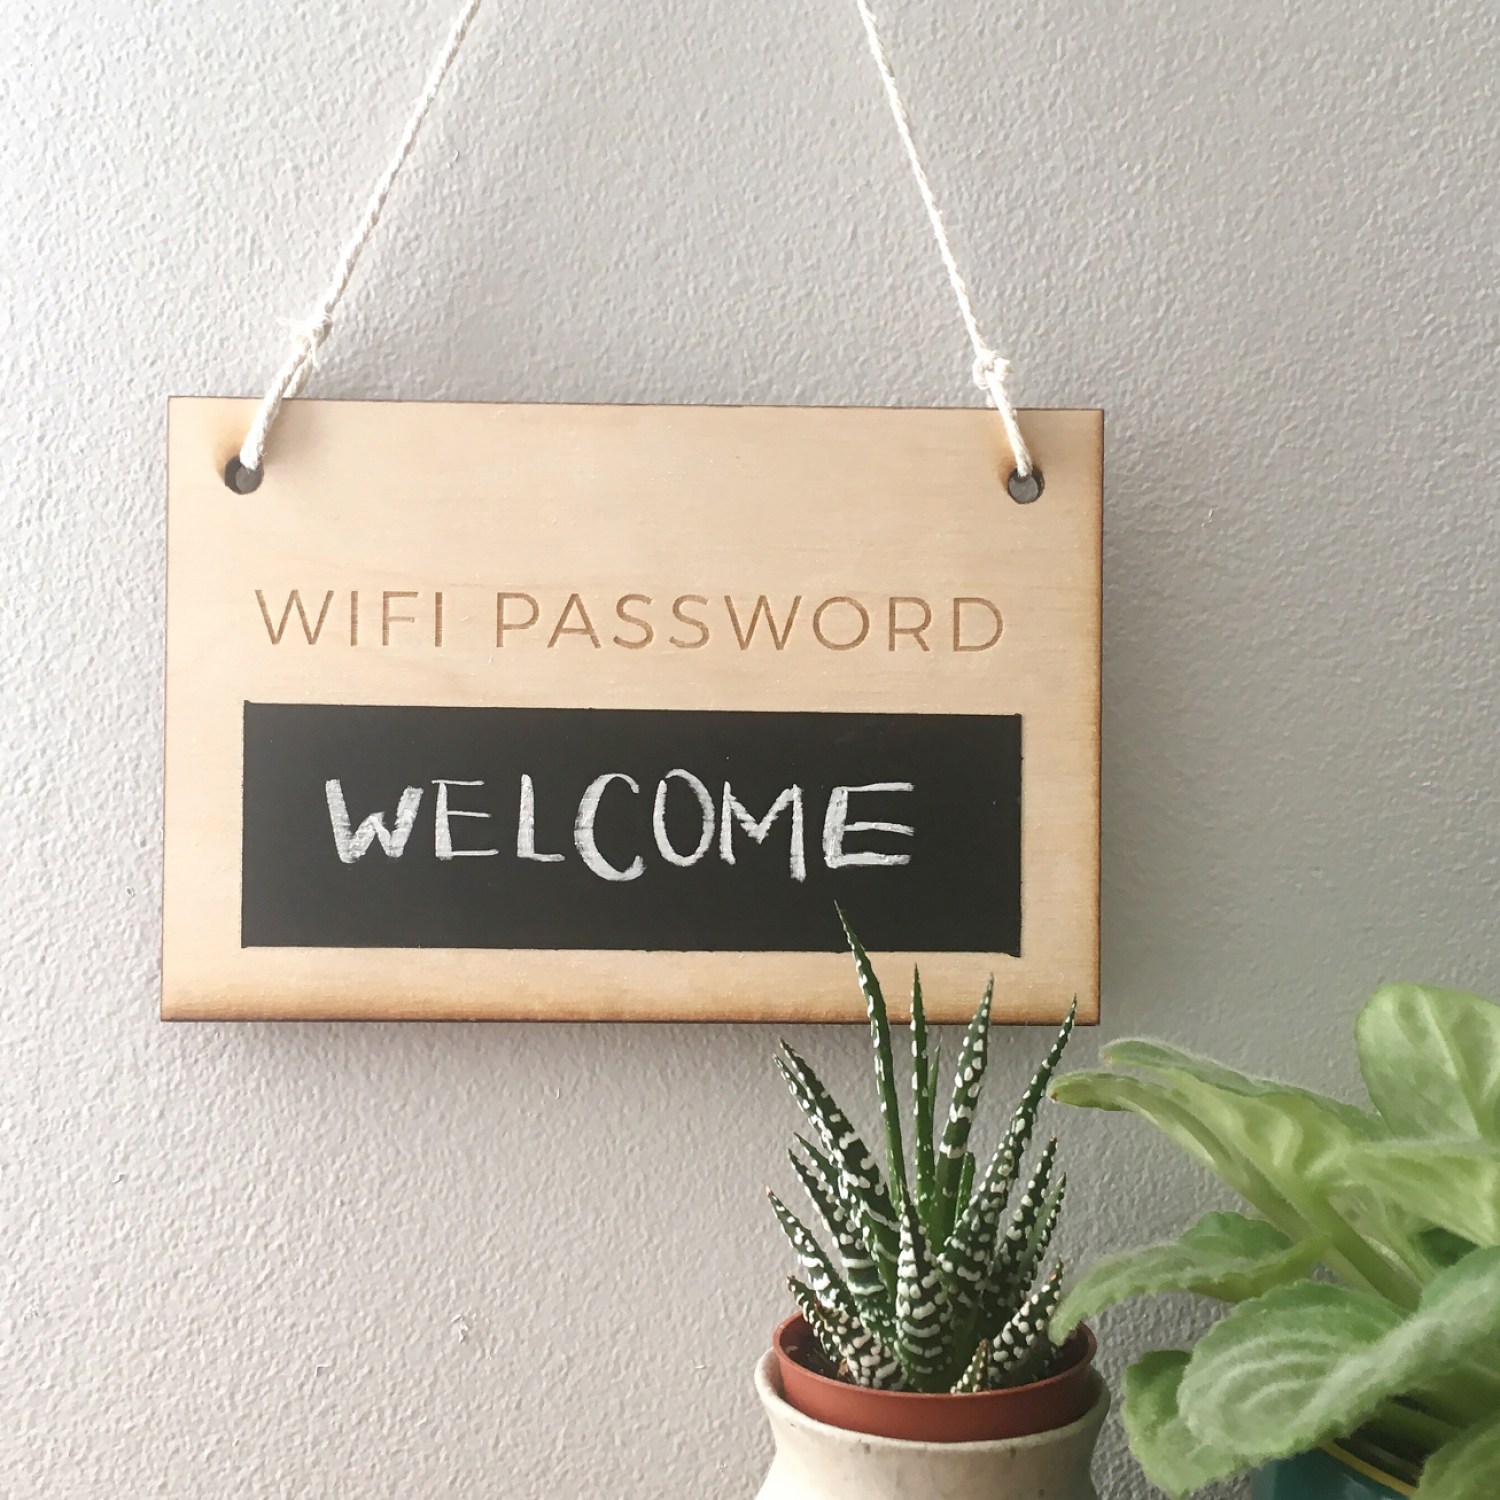 A wooden chalkboard Wi-Fi password sign with a succulent